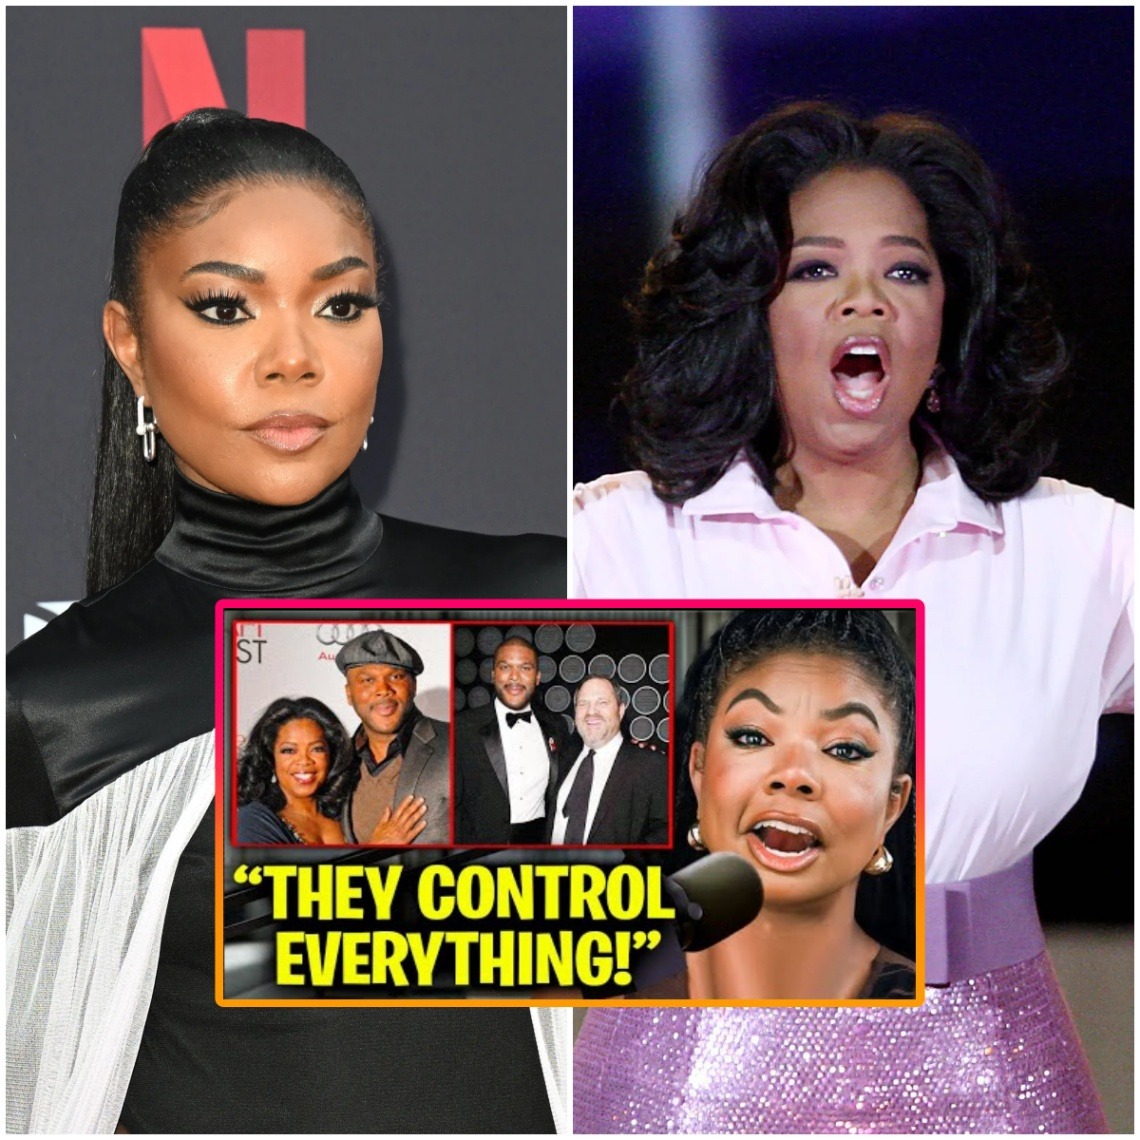 Gabrielle Union Exposes Hollywood’s Billionaire Producers ABUSES (Tyler Perry, Oprah, Weinstein…) (VIDEO)